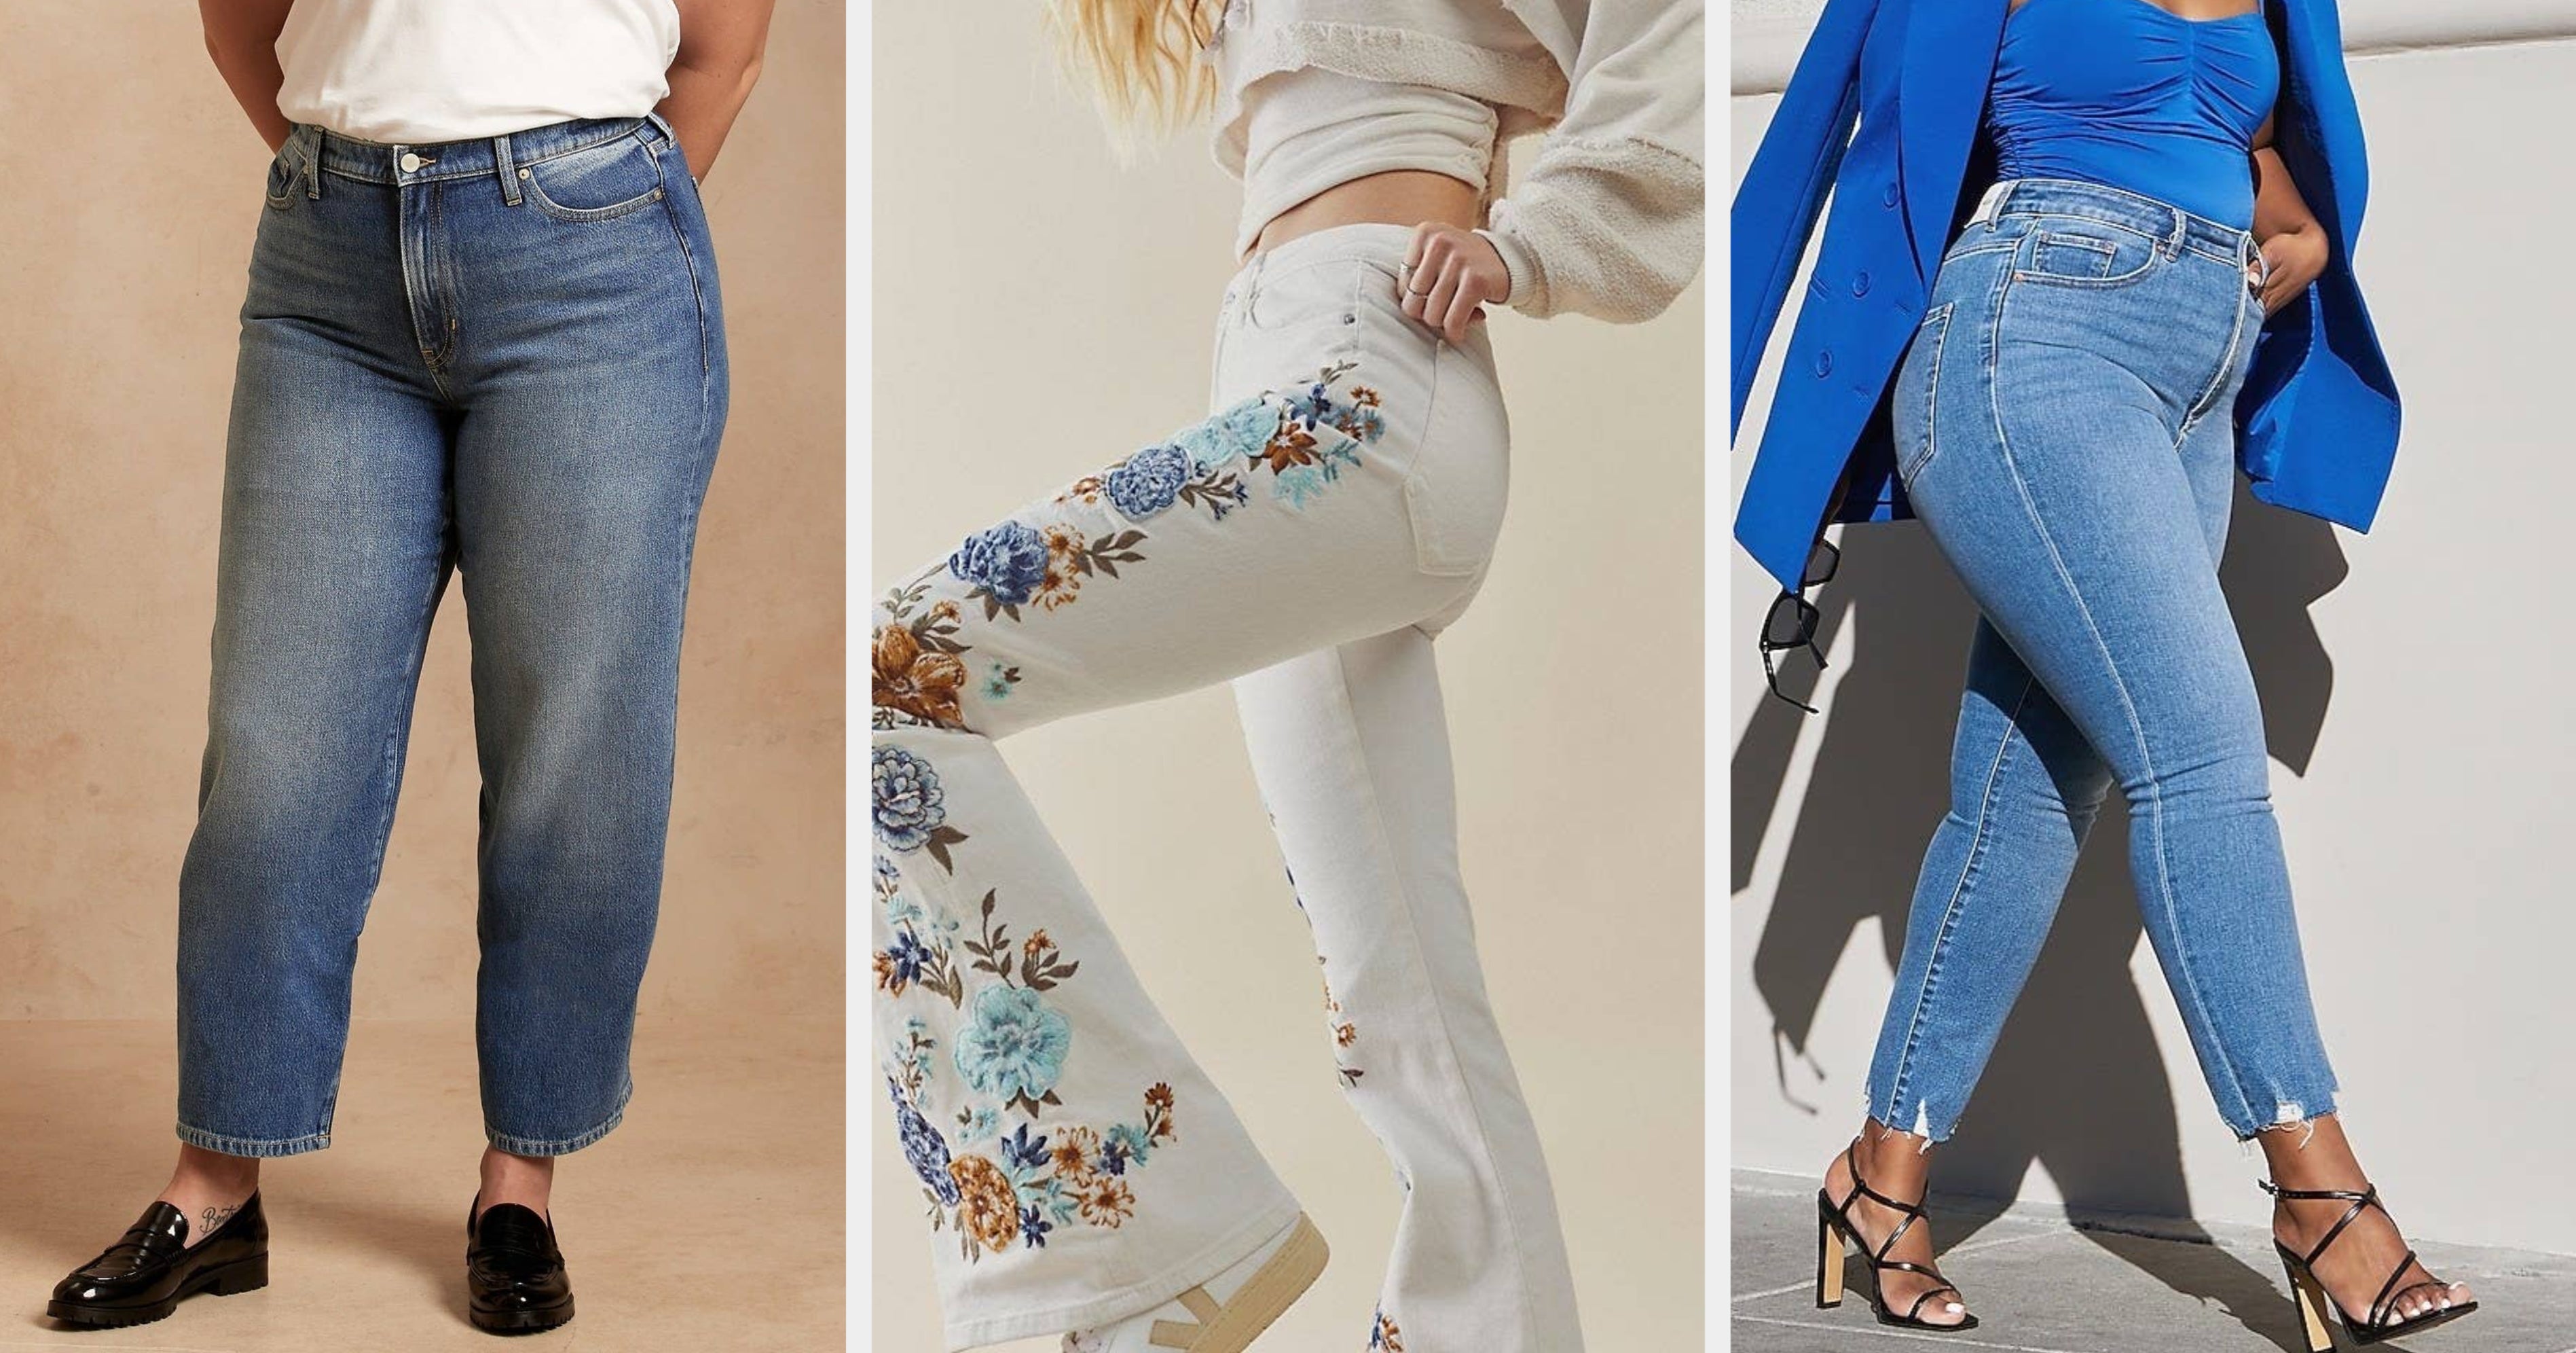 35 Of The Best Places To Buy Jeans Online In 2022